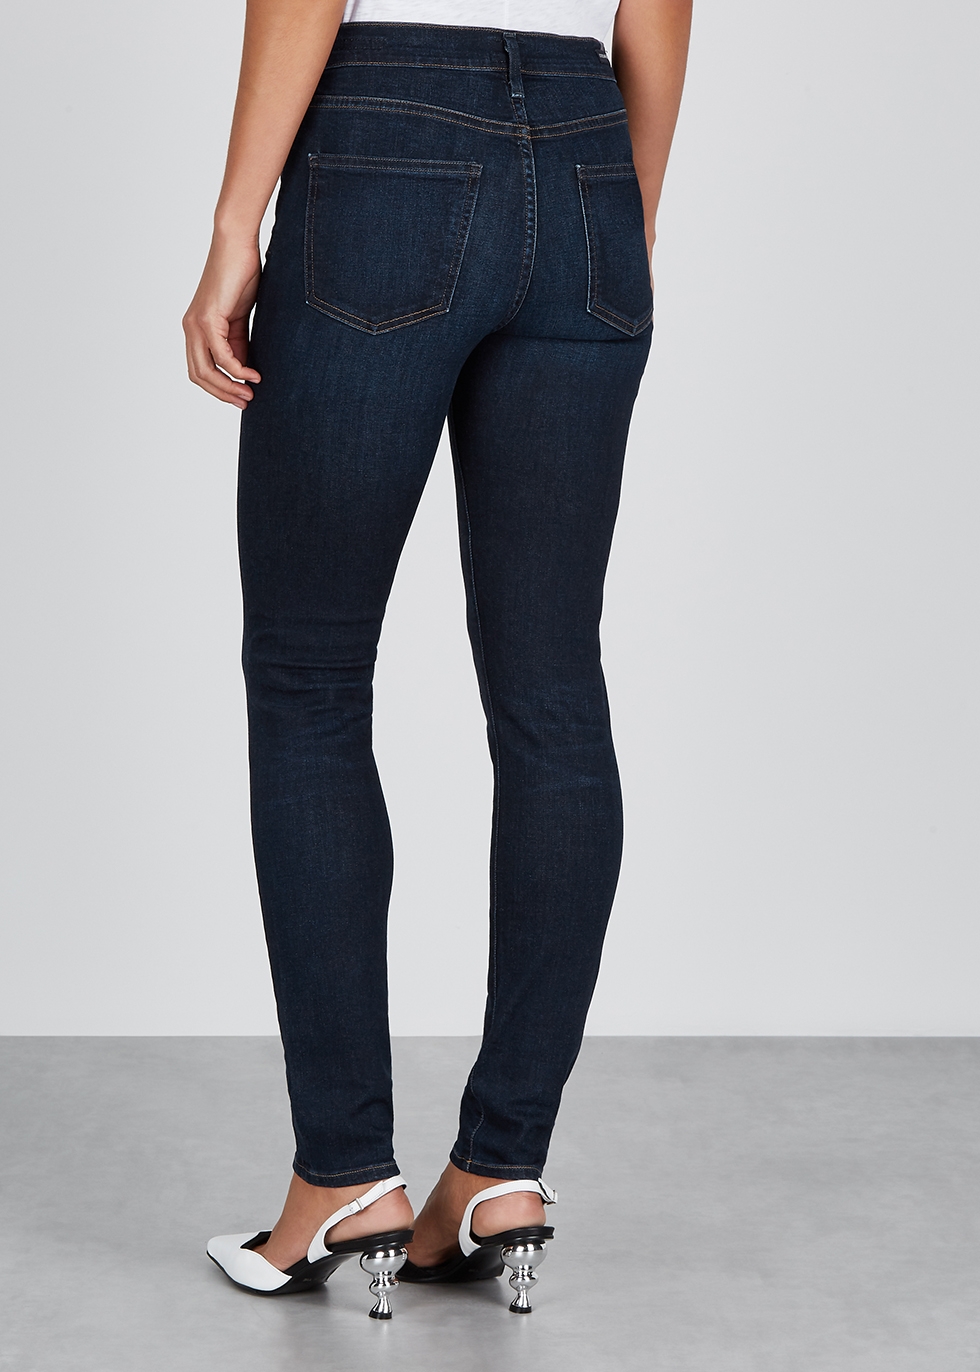 citizens of humanity skinny jeans